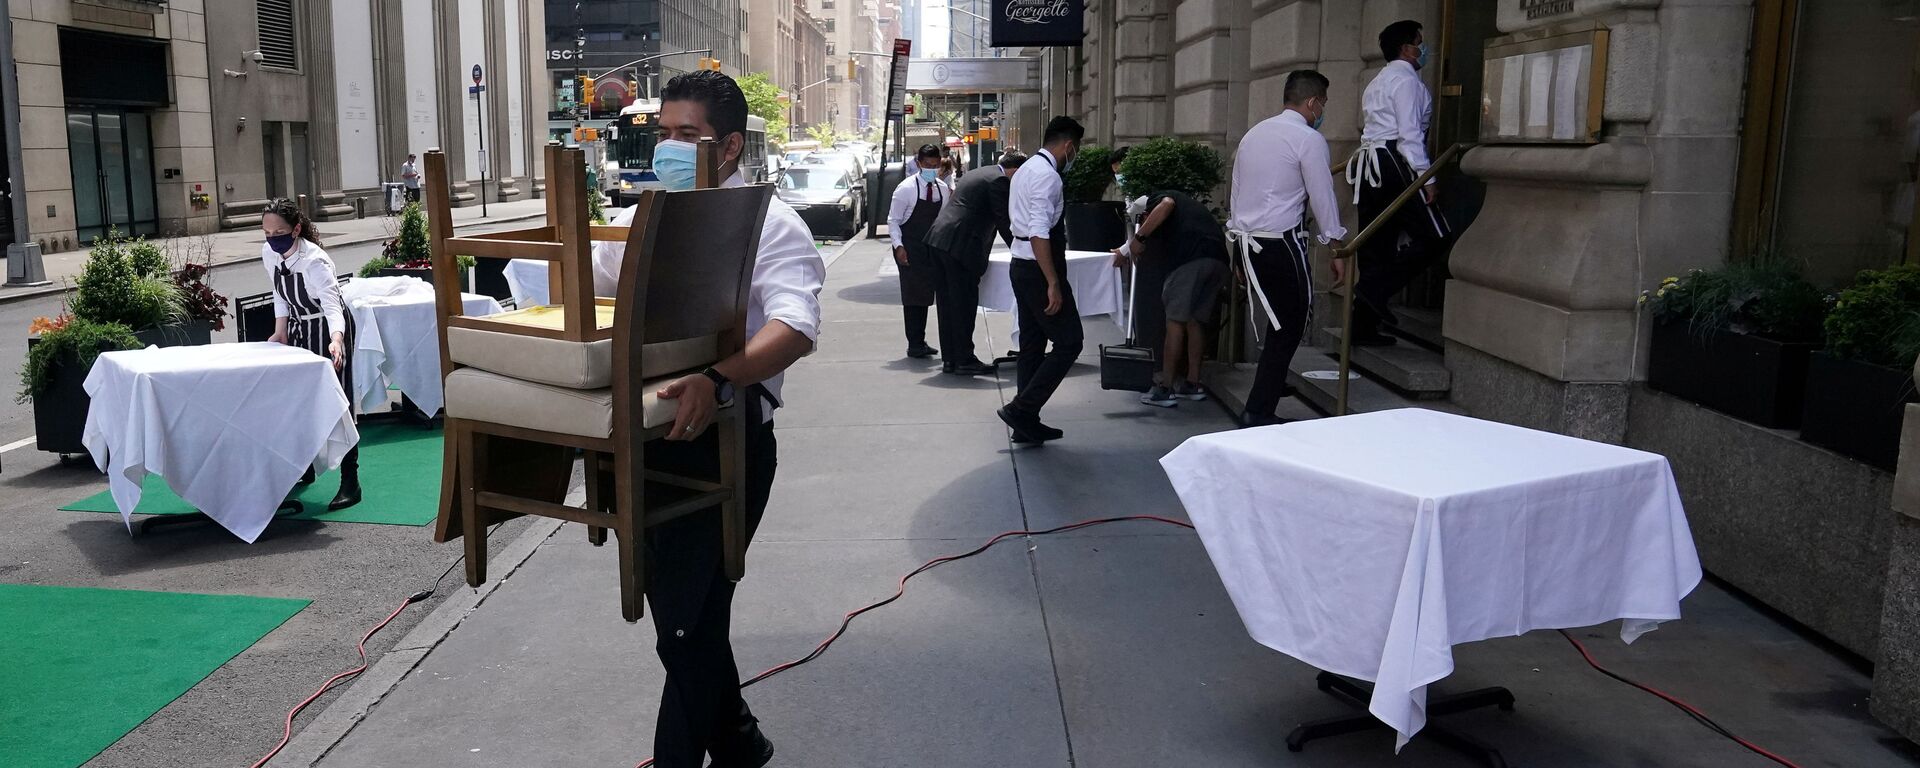 FILE PHOTO: A waiter sets up tables in front of a restaurant on a street on the first day of the phase two re-opening of businesses following the outbreak of the coronavirus disease (COVID-19), in the Manhattan borough of New York City, New York, U.S., June 22, 2020.  - Sputnik International, 1920, 02.08.2021